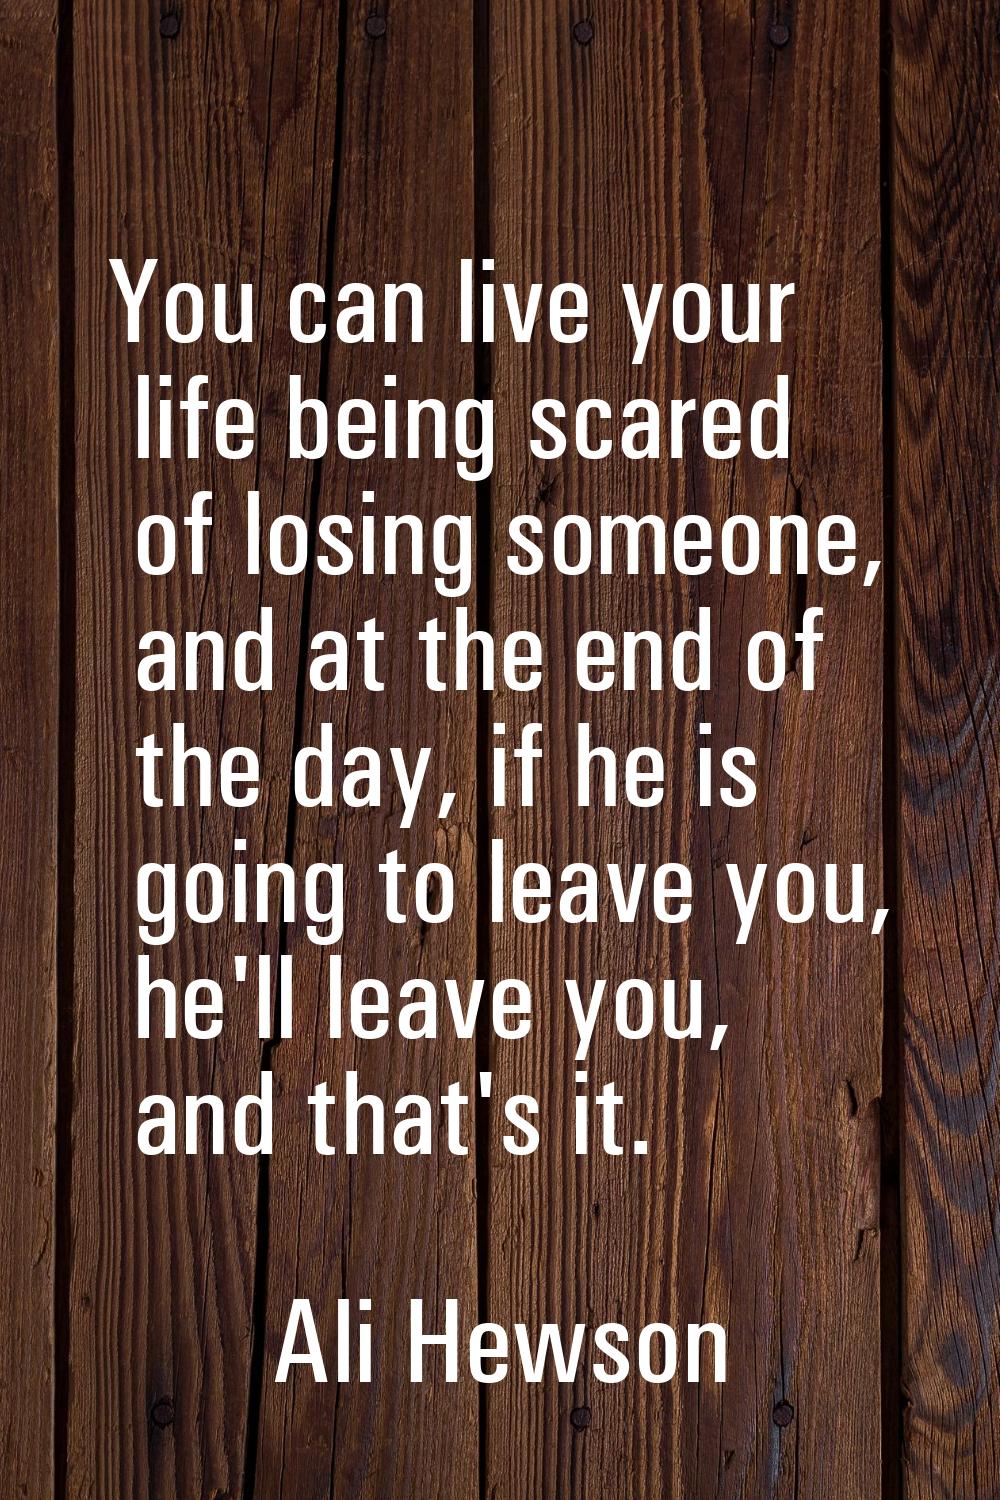 You can live your life being scared of losing someone, and at the end of the day, if he is going to